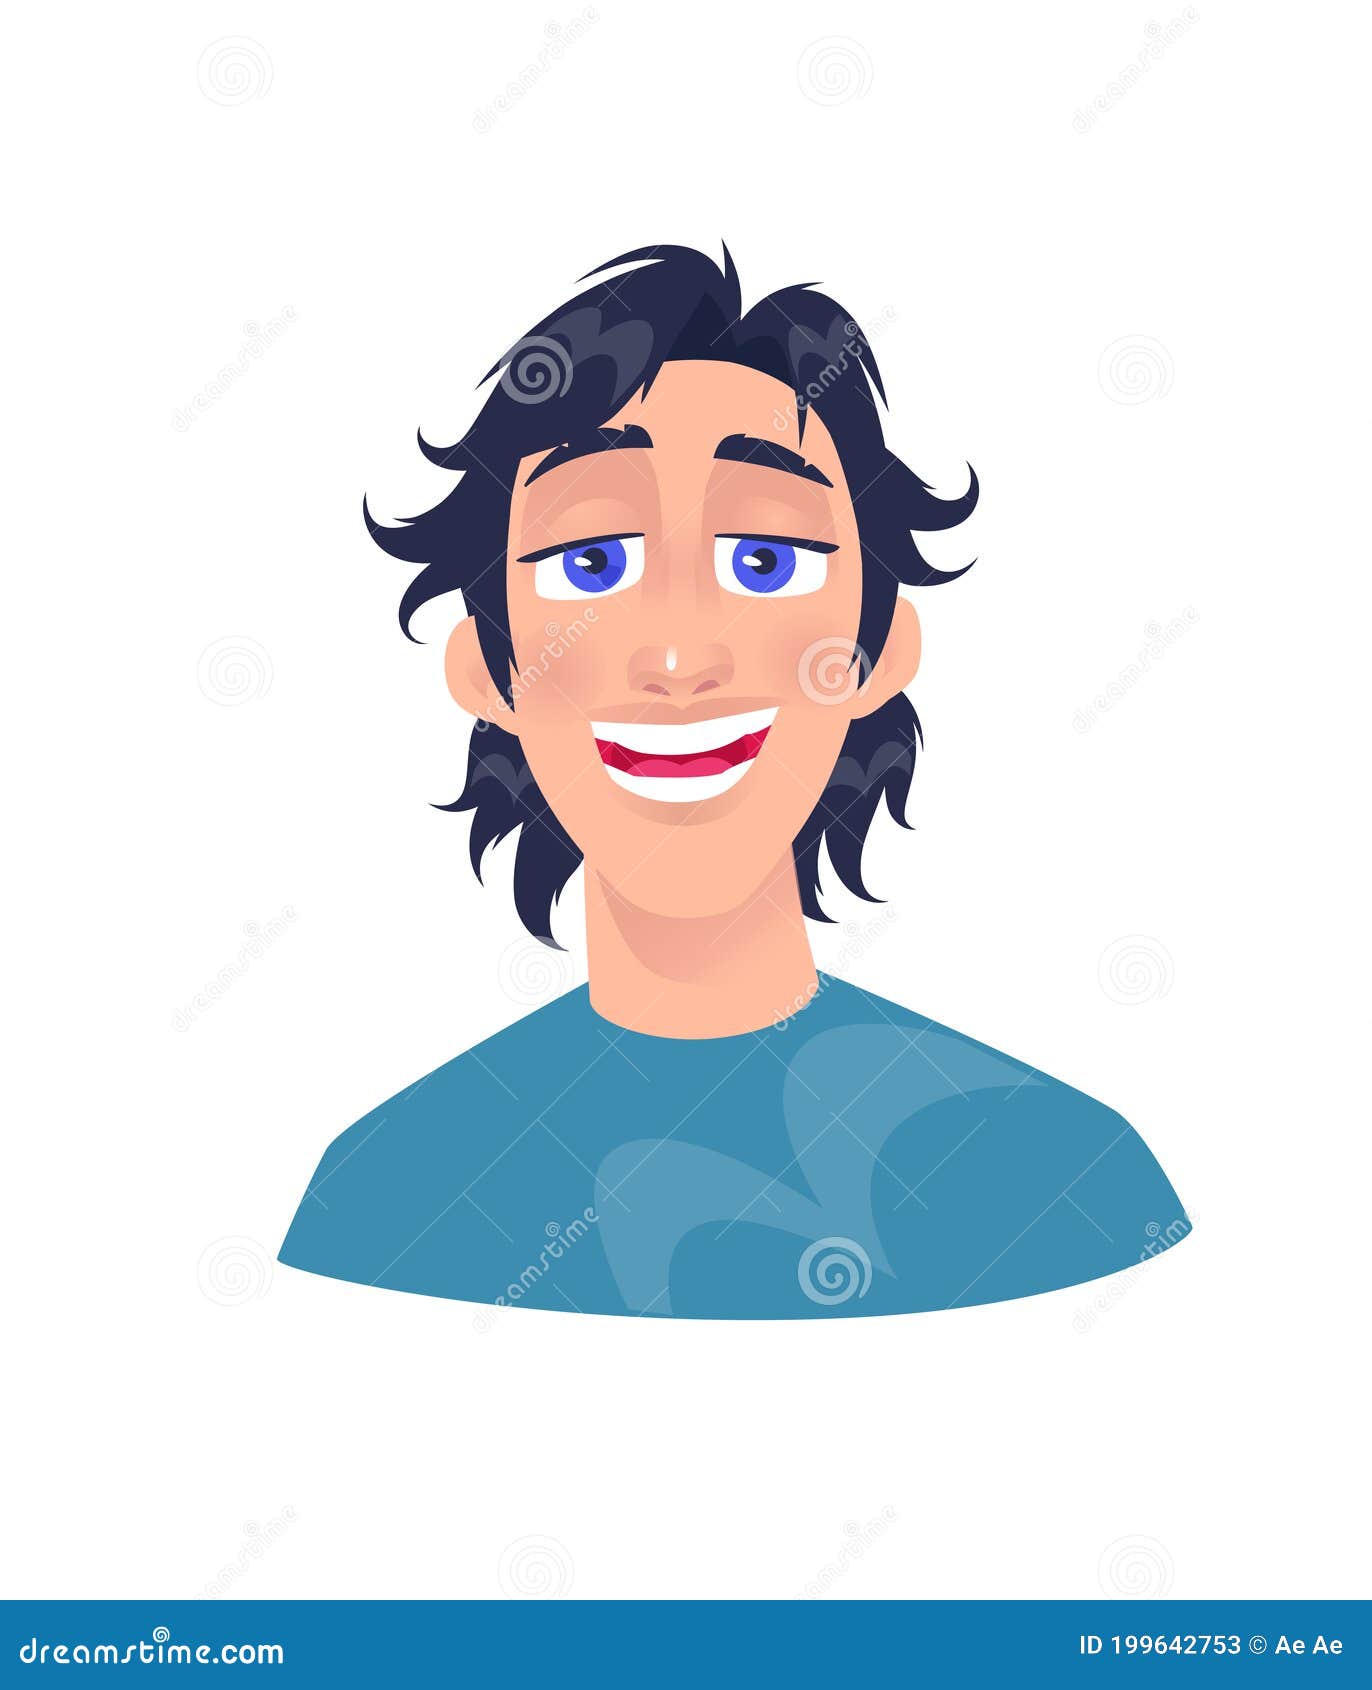 Illustration of a Young Man. Vector. Adult Guy Cartoon Character for  Advertising and Design. Bright Positive Image with Big Eyes Stock Vector -  Illustration of eyes, cartoon: 199642753